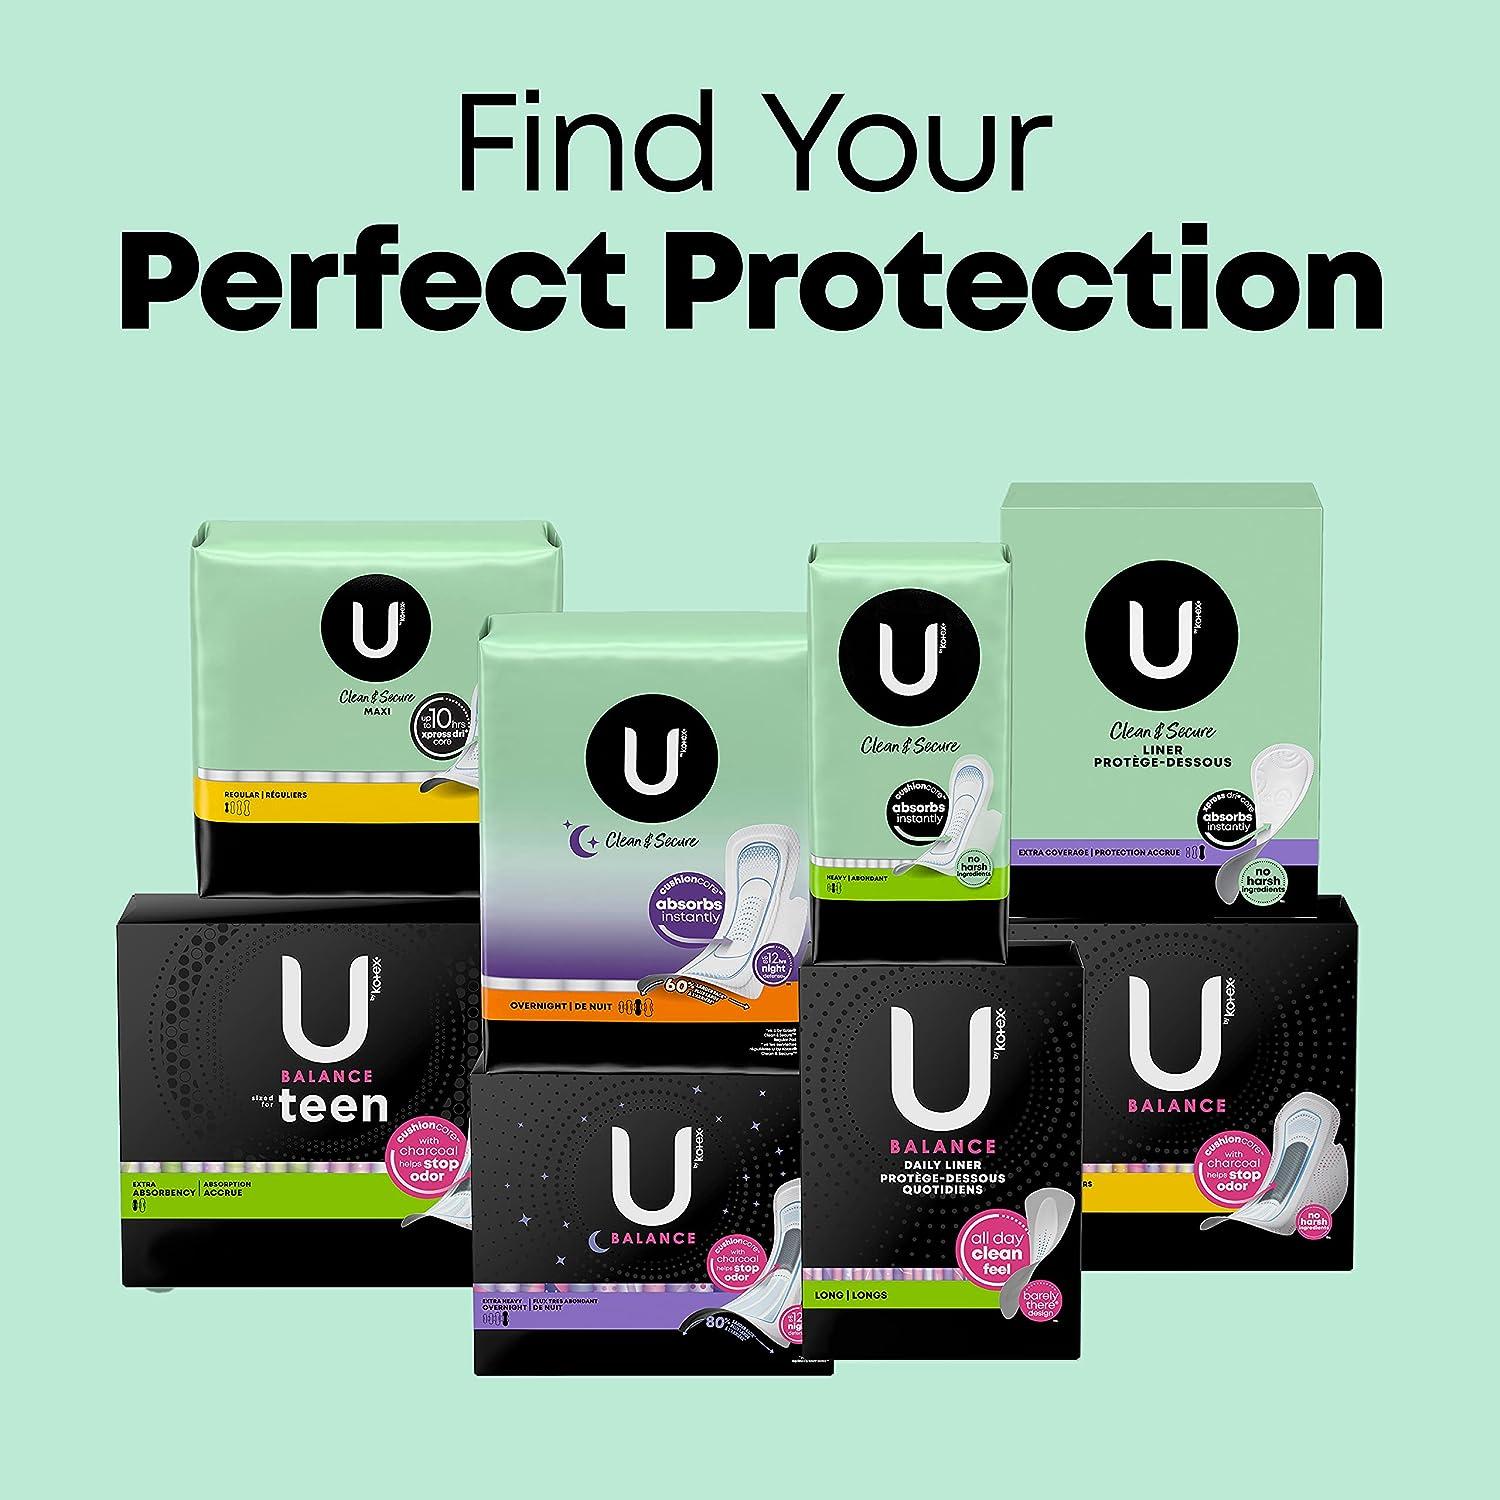 U by Kotex Clean & Secure Ultra Thin Pads, Heavy Absorbency, 56 Count